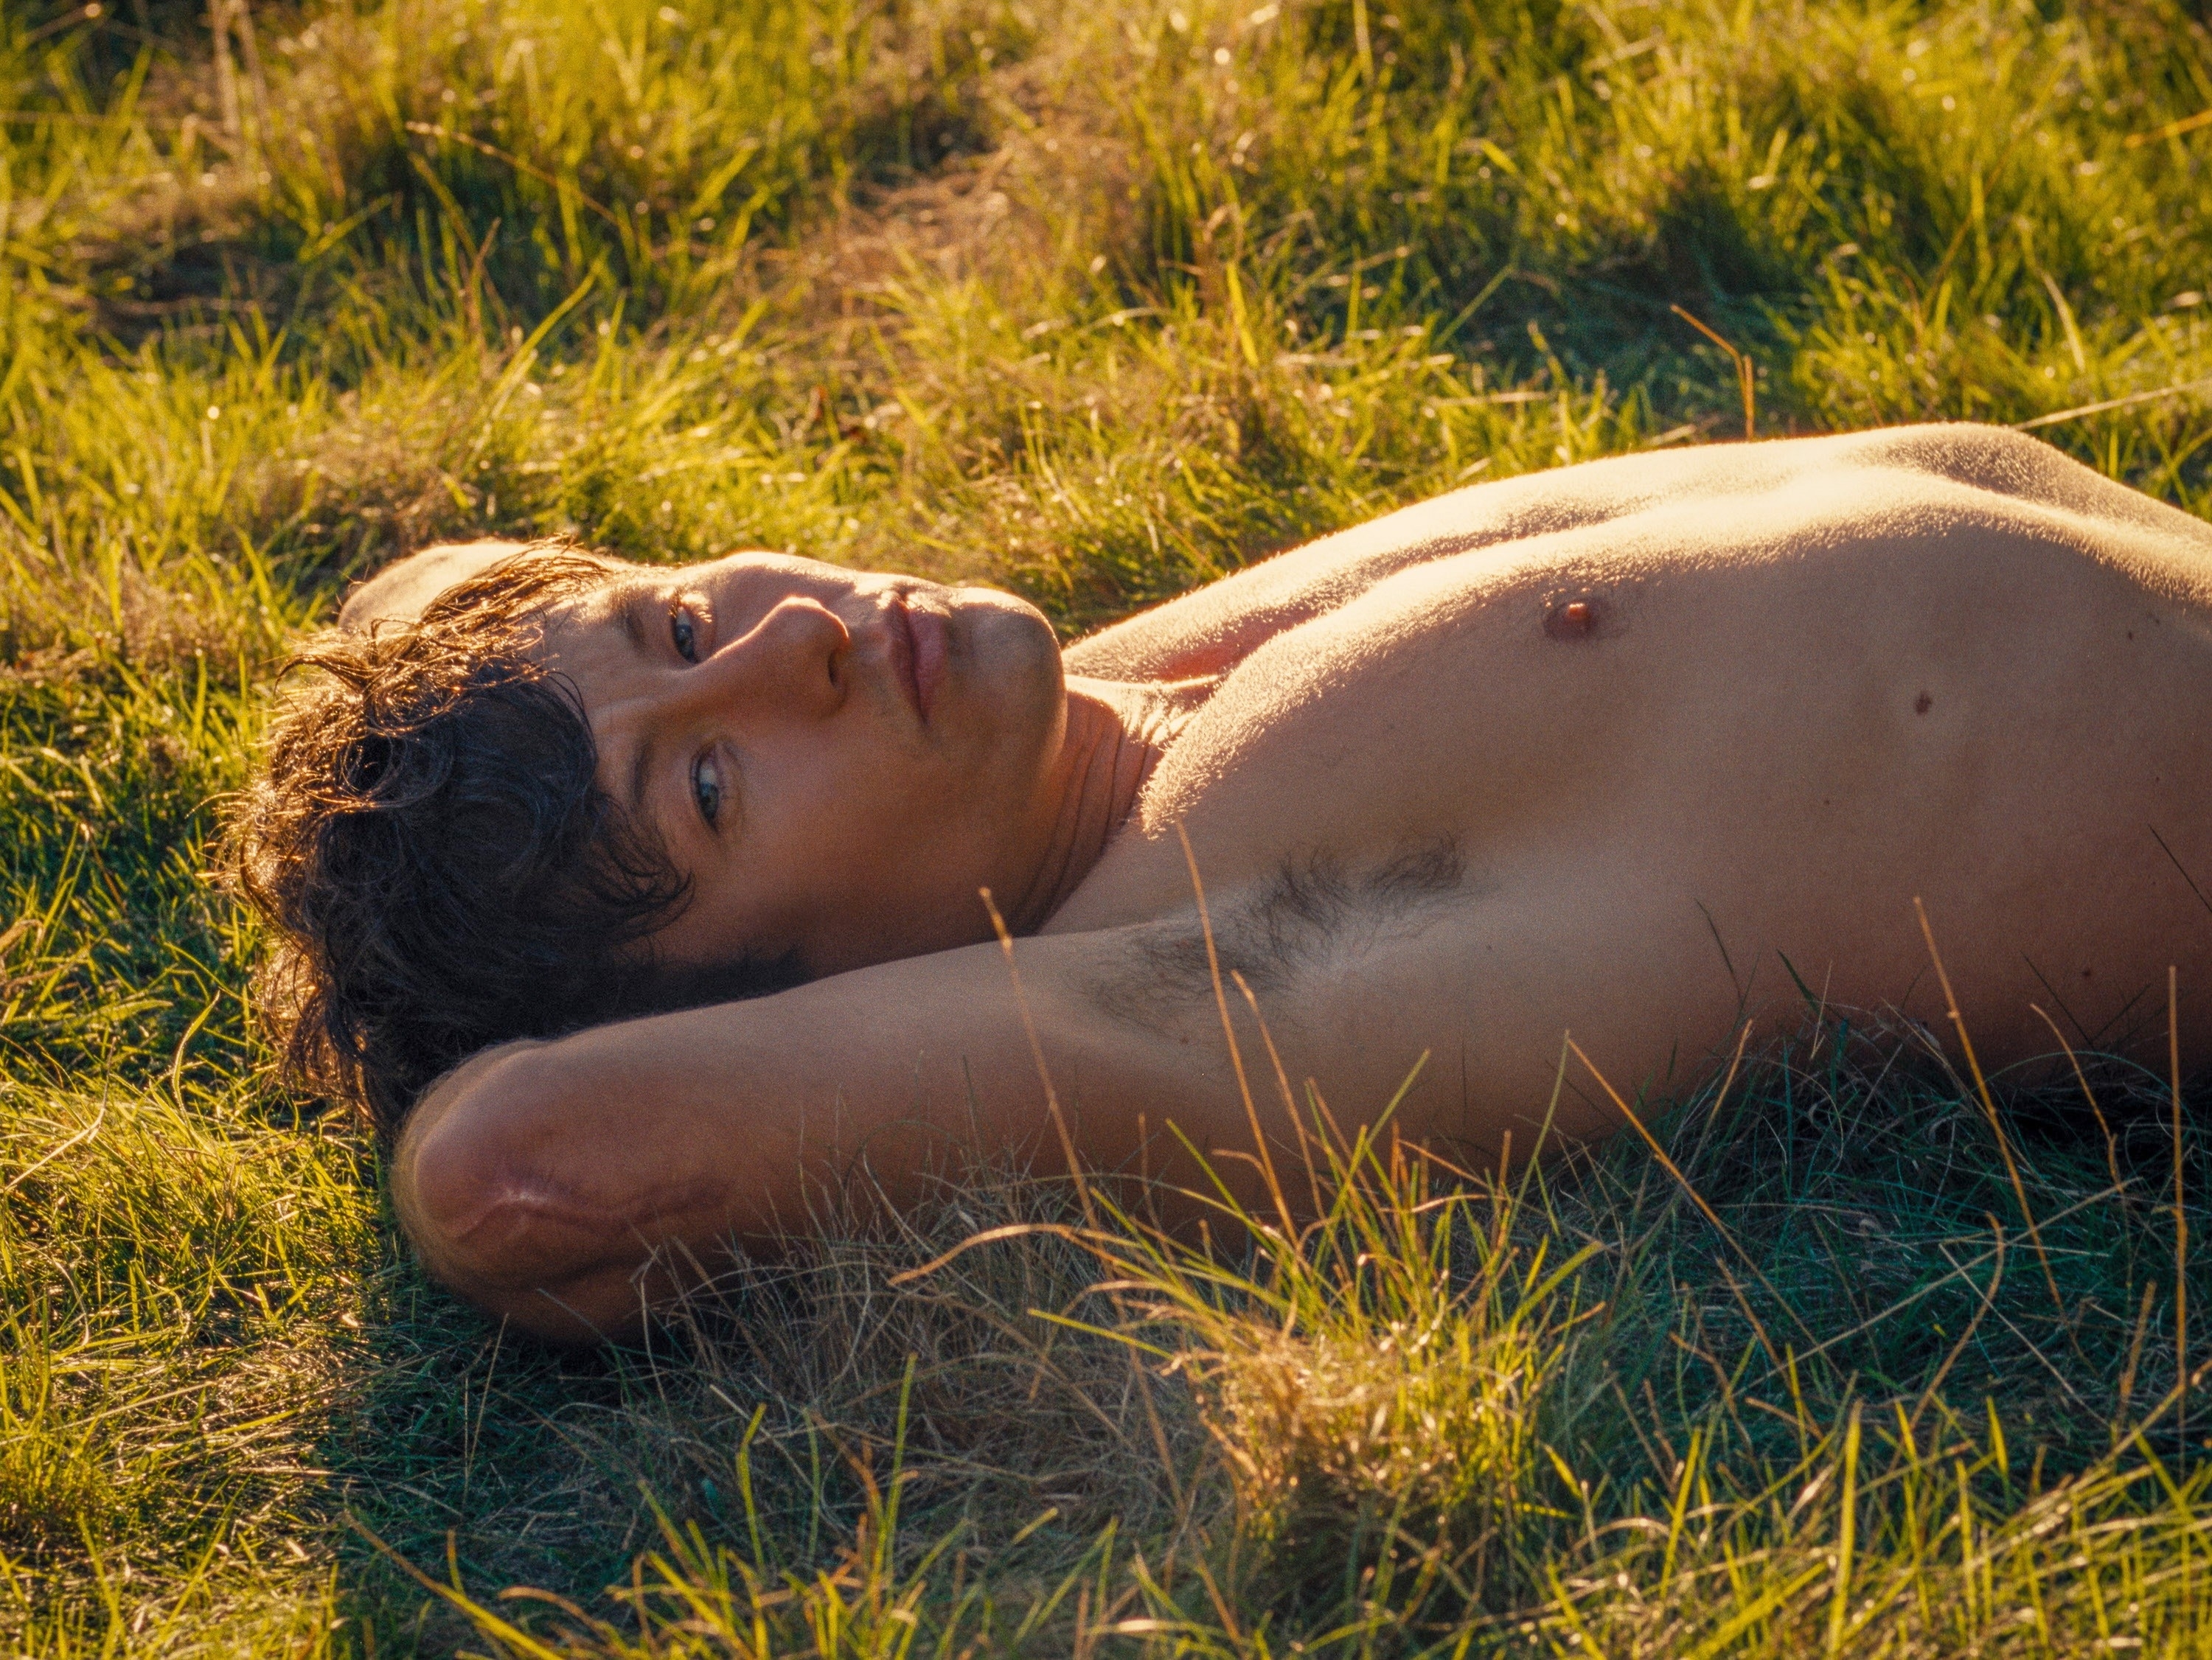 Barry shirtless lying in the grass in a scene from &quot;Saltburn&quot;